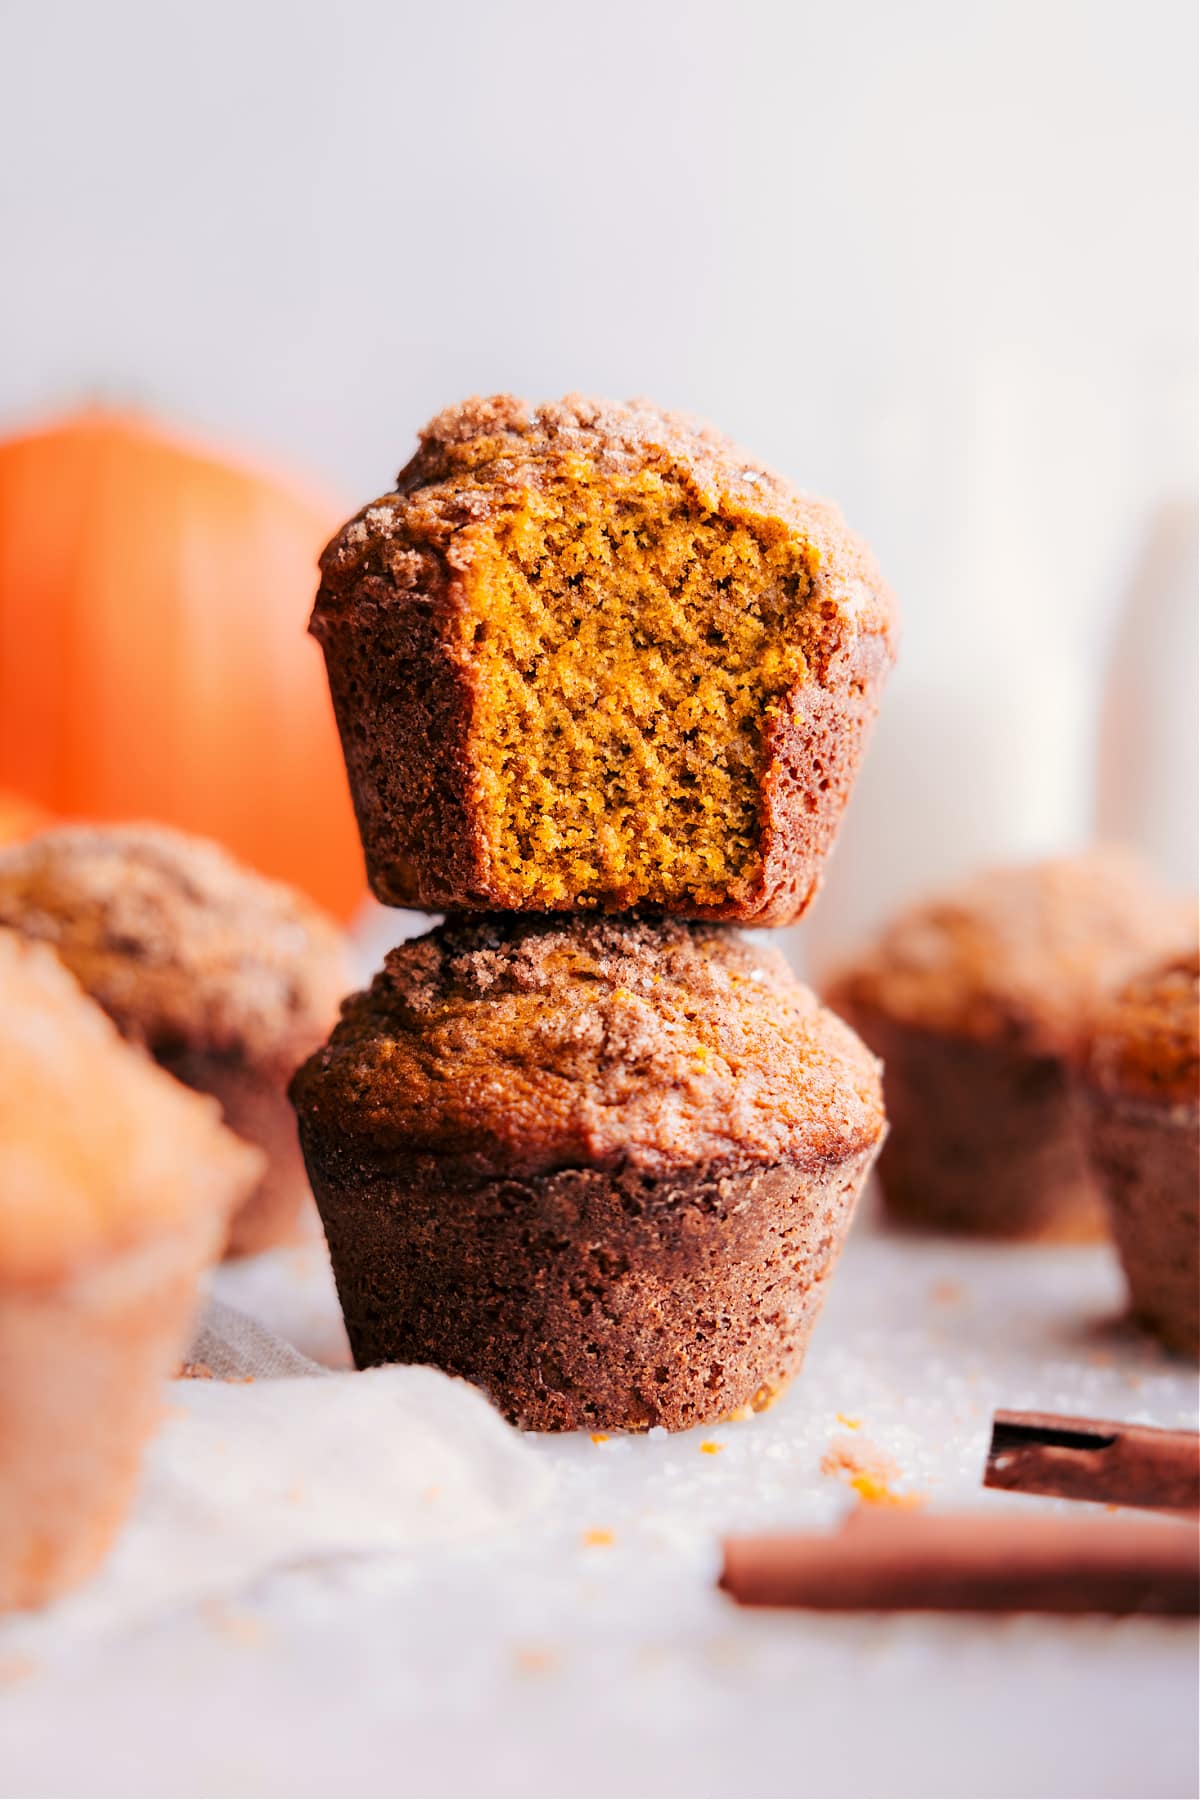 A stack of pumpkin muffins with a warm, golden tone, one at the front displaying a bite taken, revealing the moist interior.